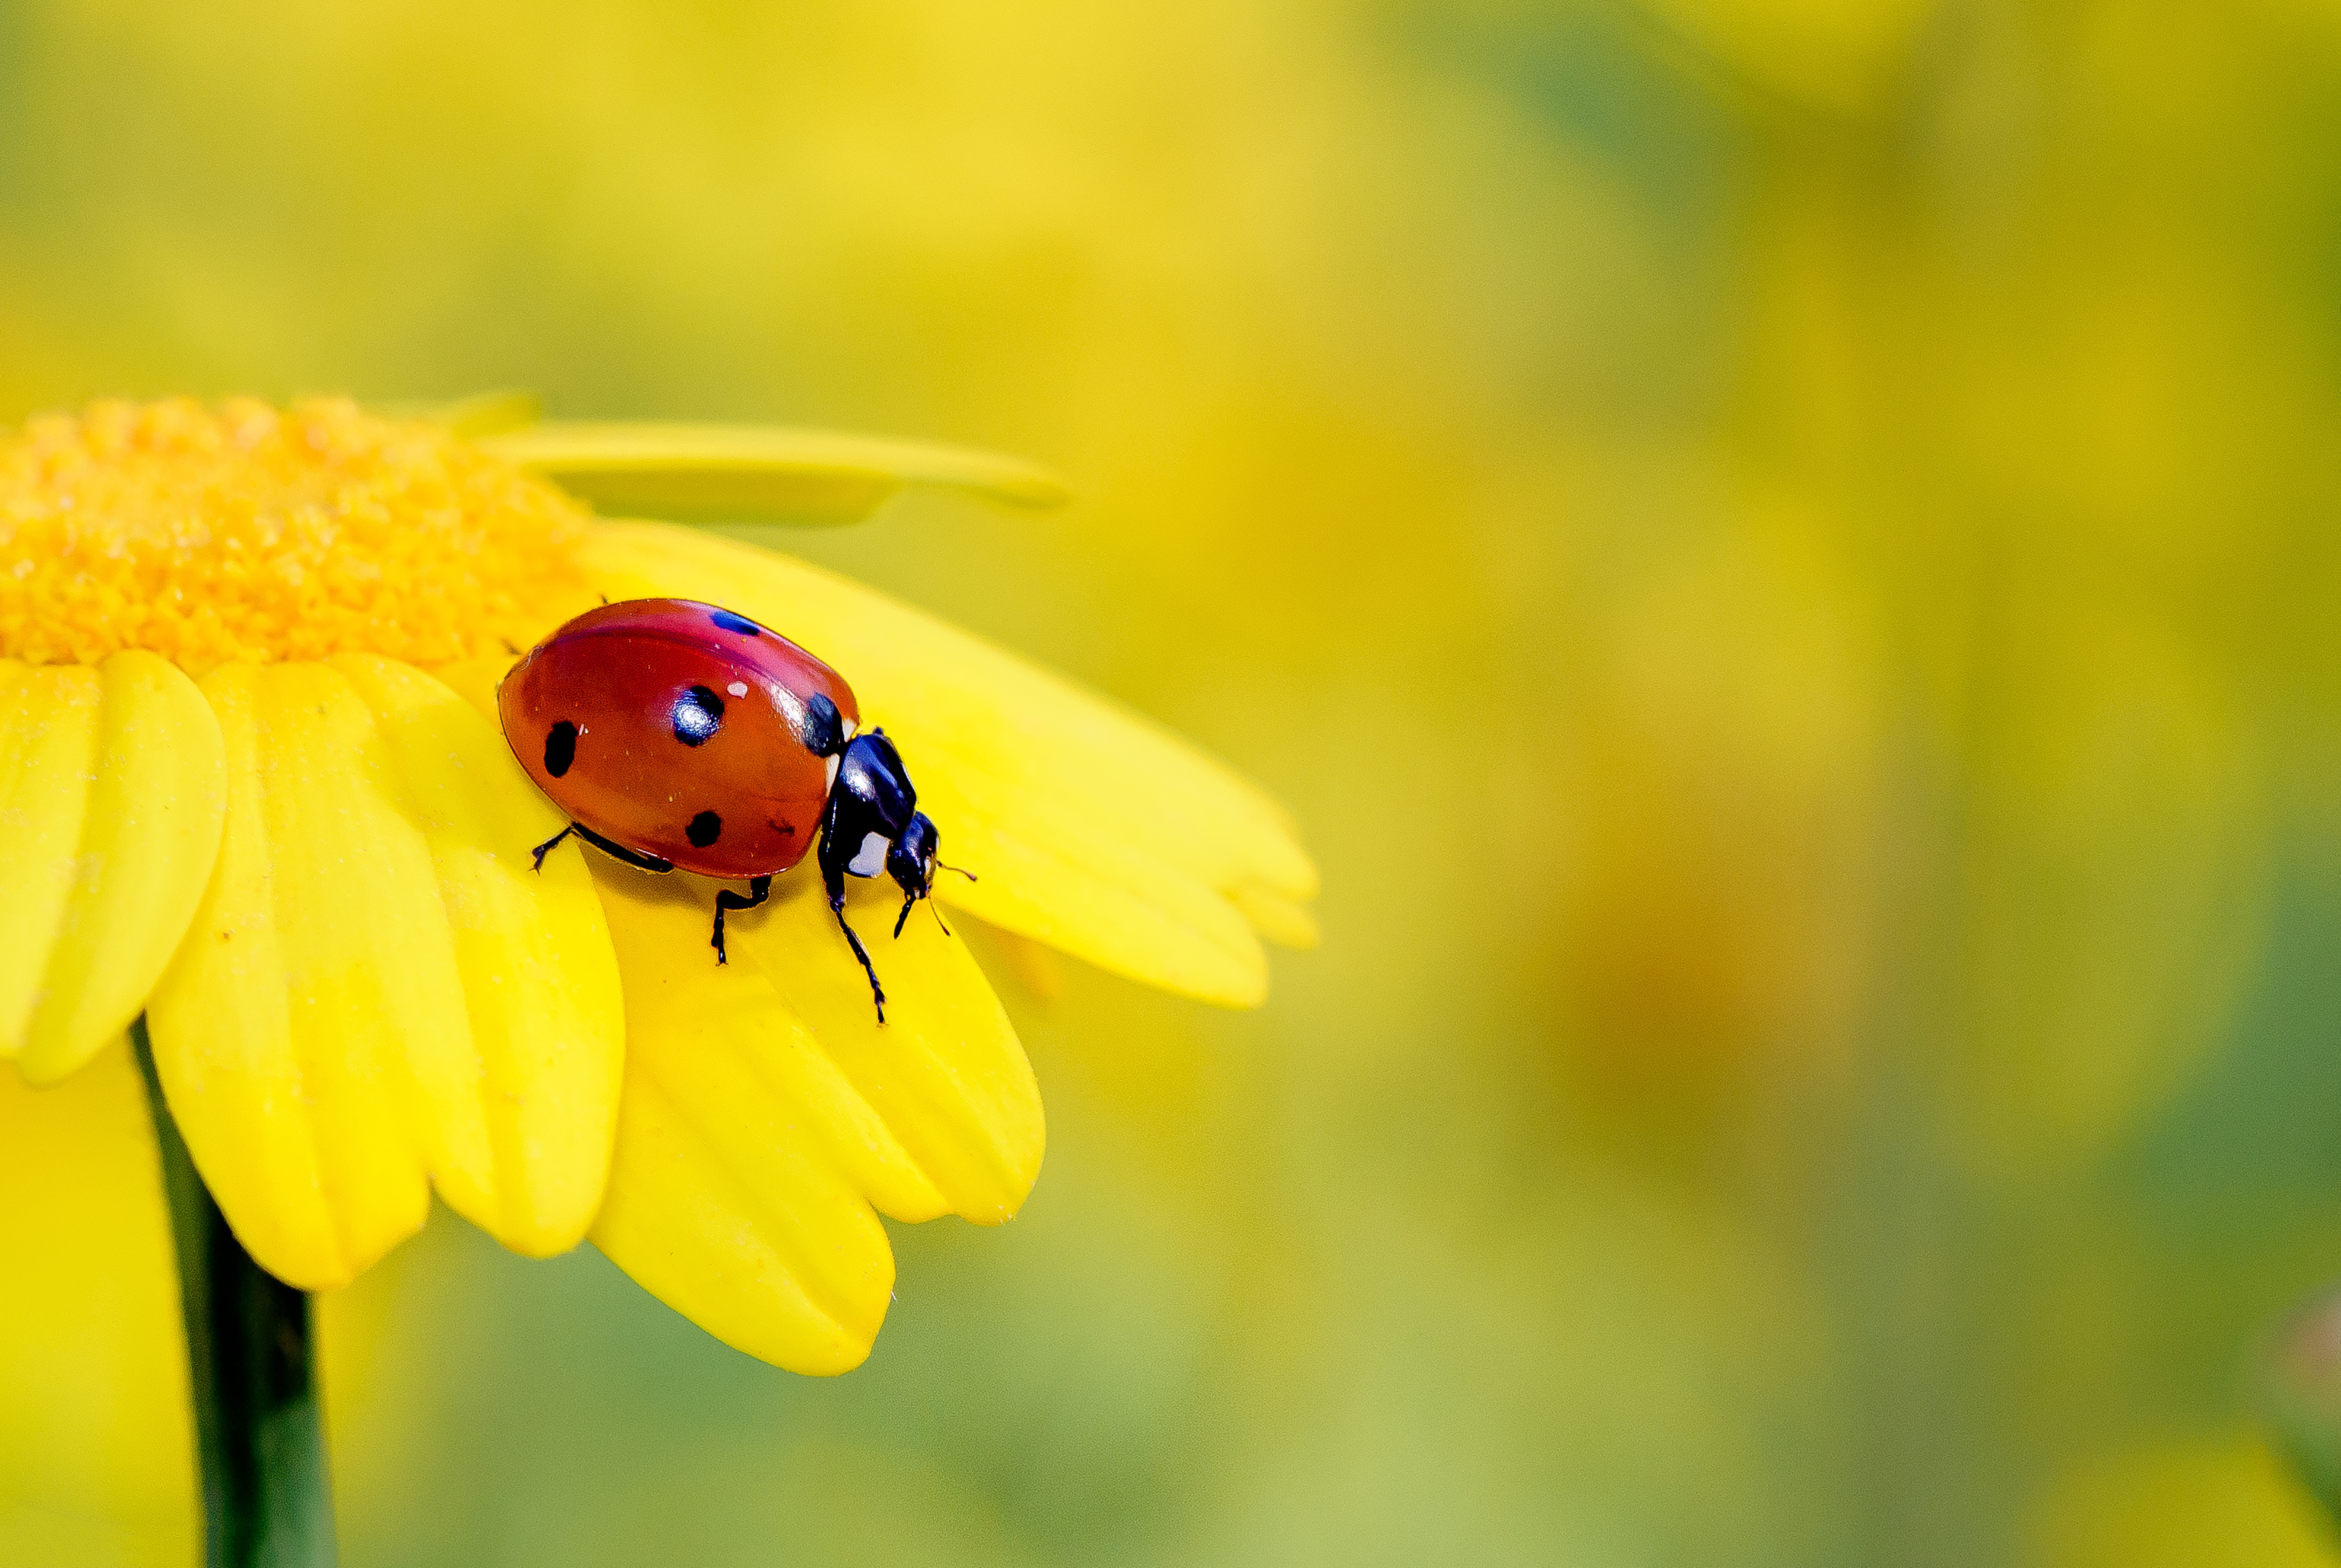 In general, buying lady beetles and other predatory beneficial insects have their limitations in open gardens. (Pixabay)